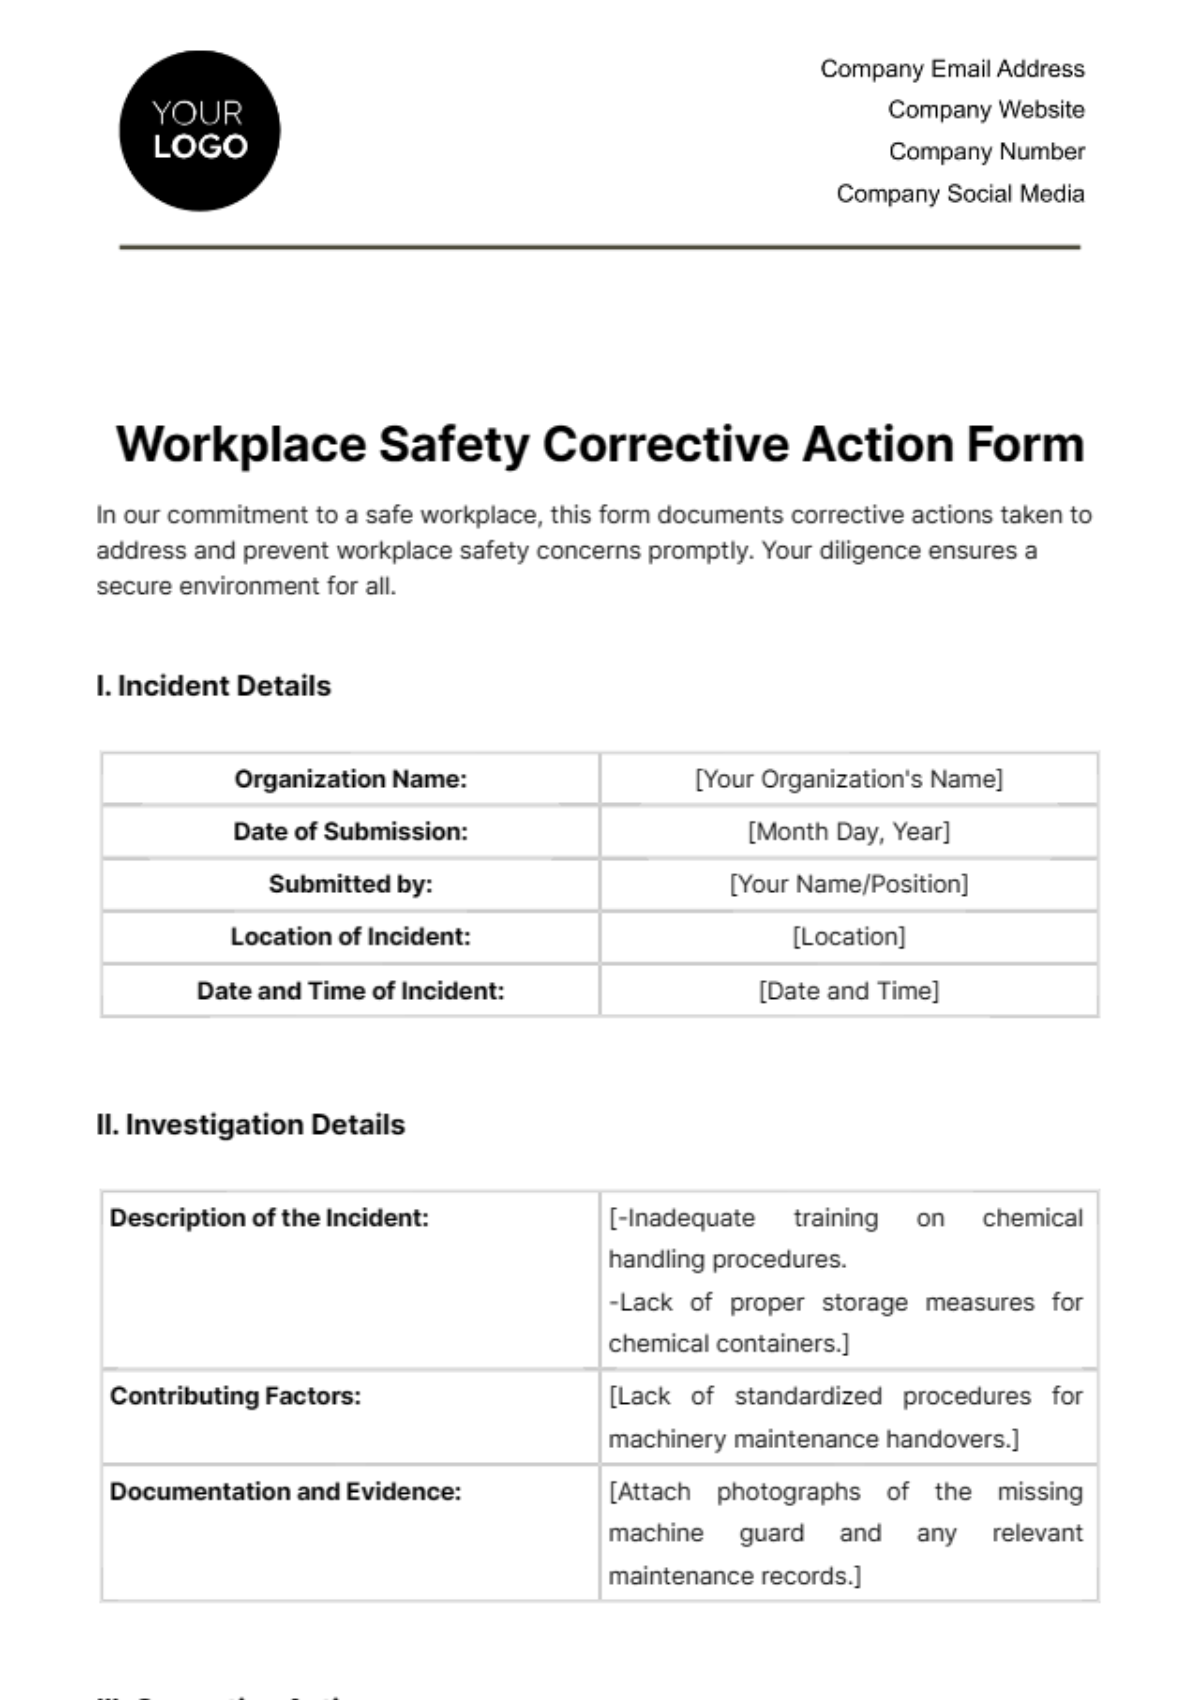 Workplace Safety Corrective Action Form Template